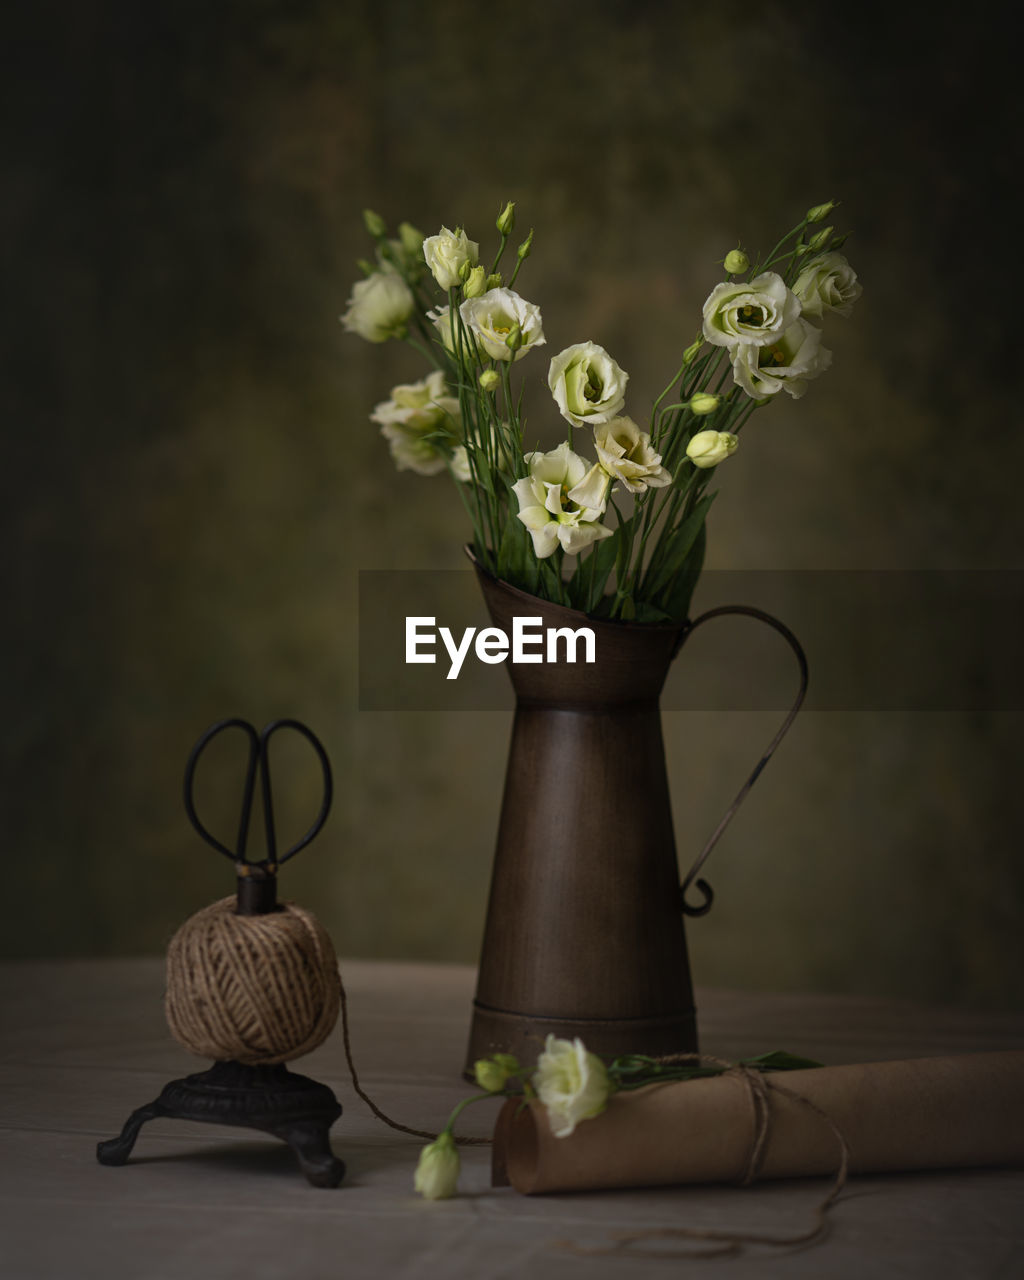 CLOSE-UP OF FLOWER VASE ON TABLE AGAINST WALL